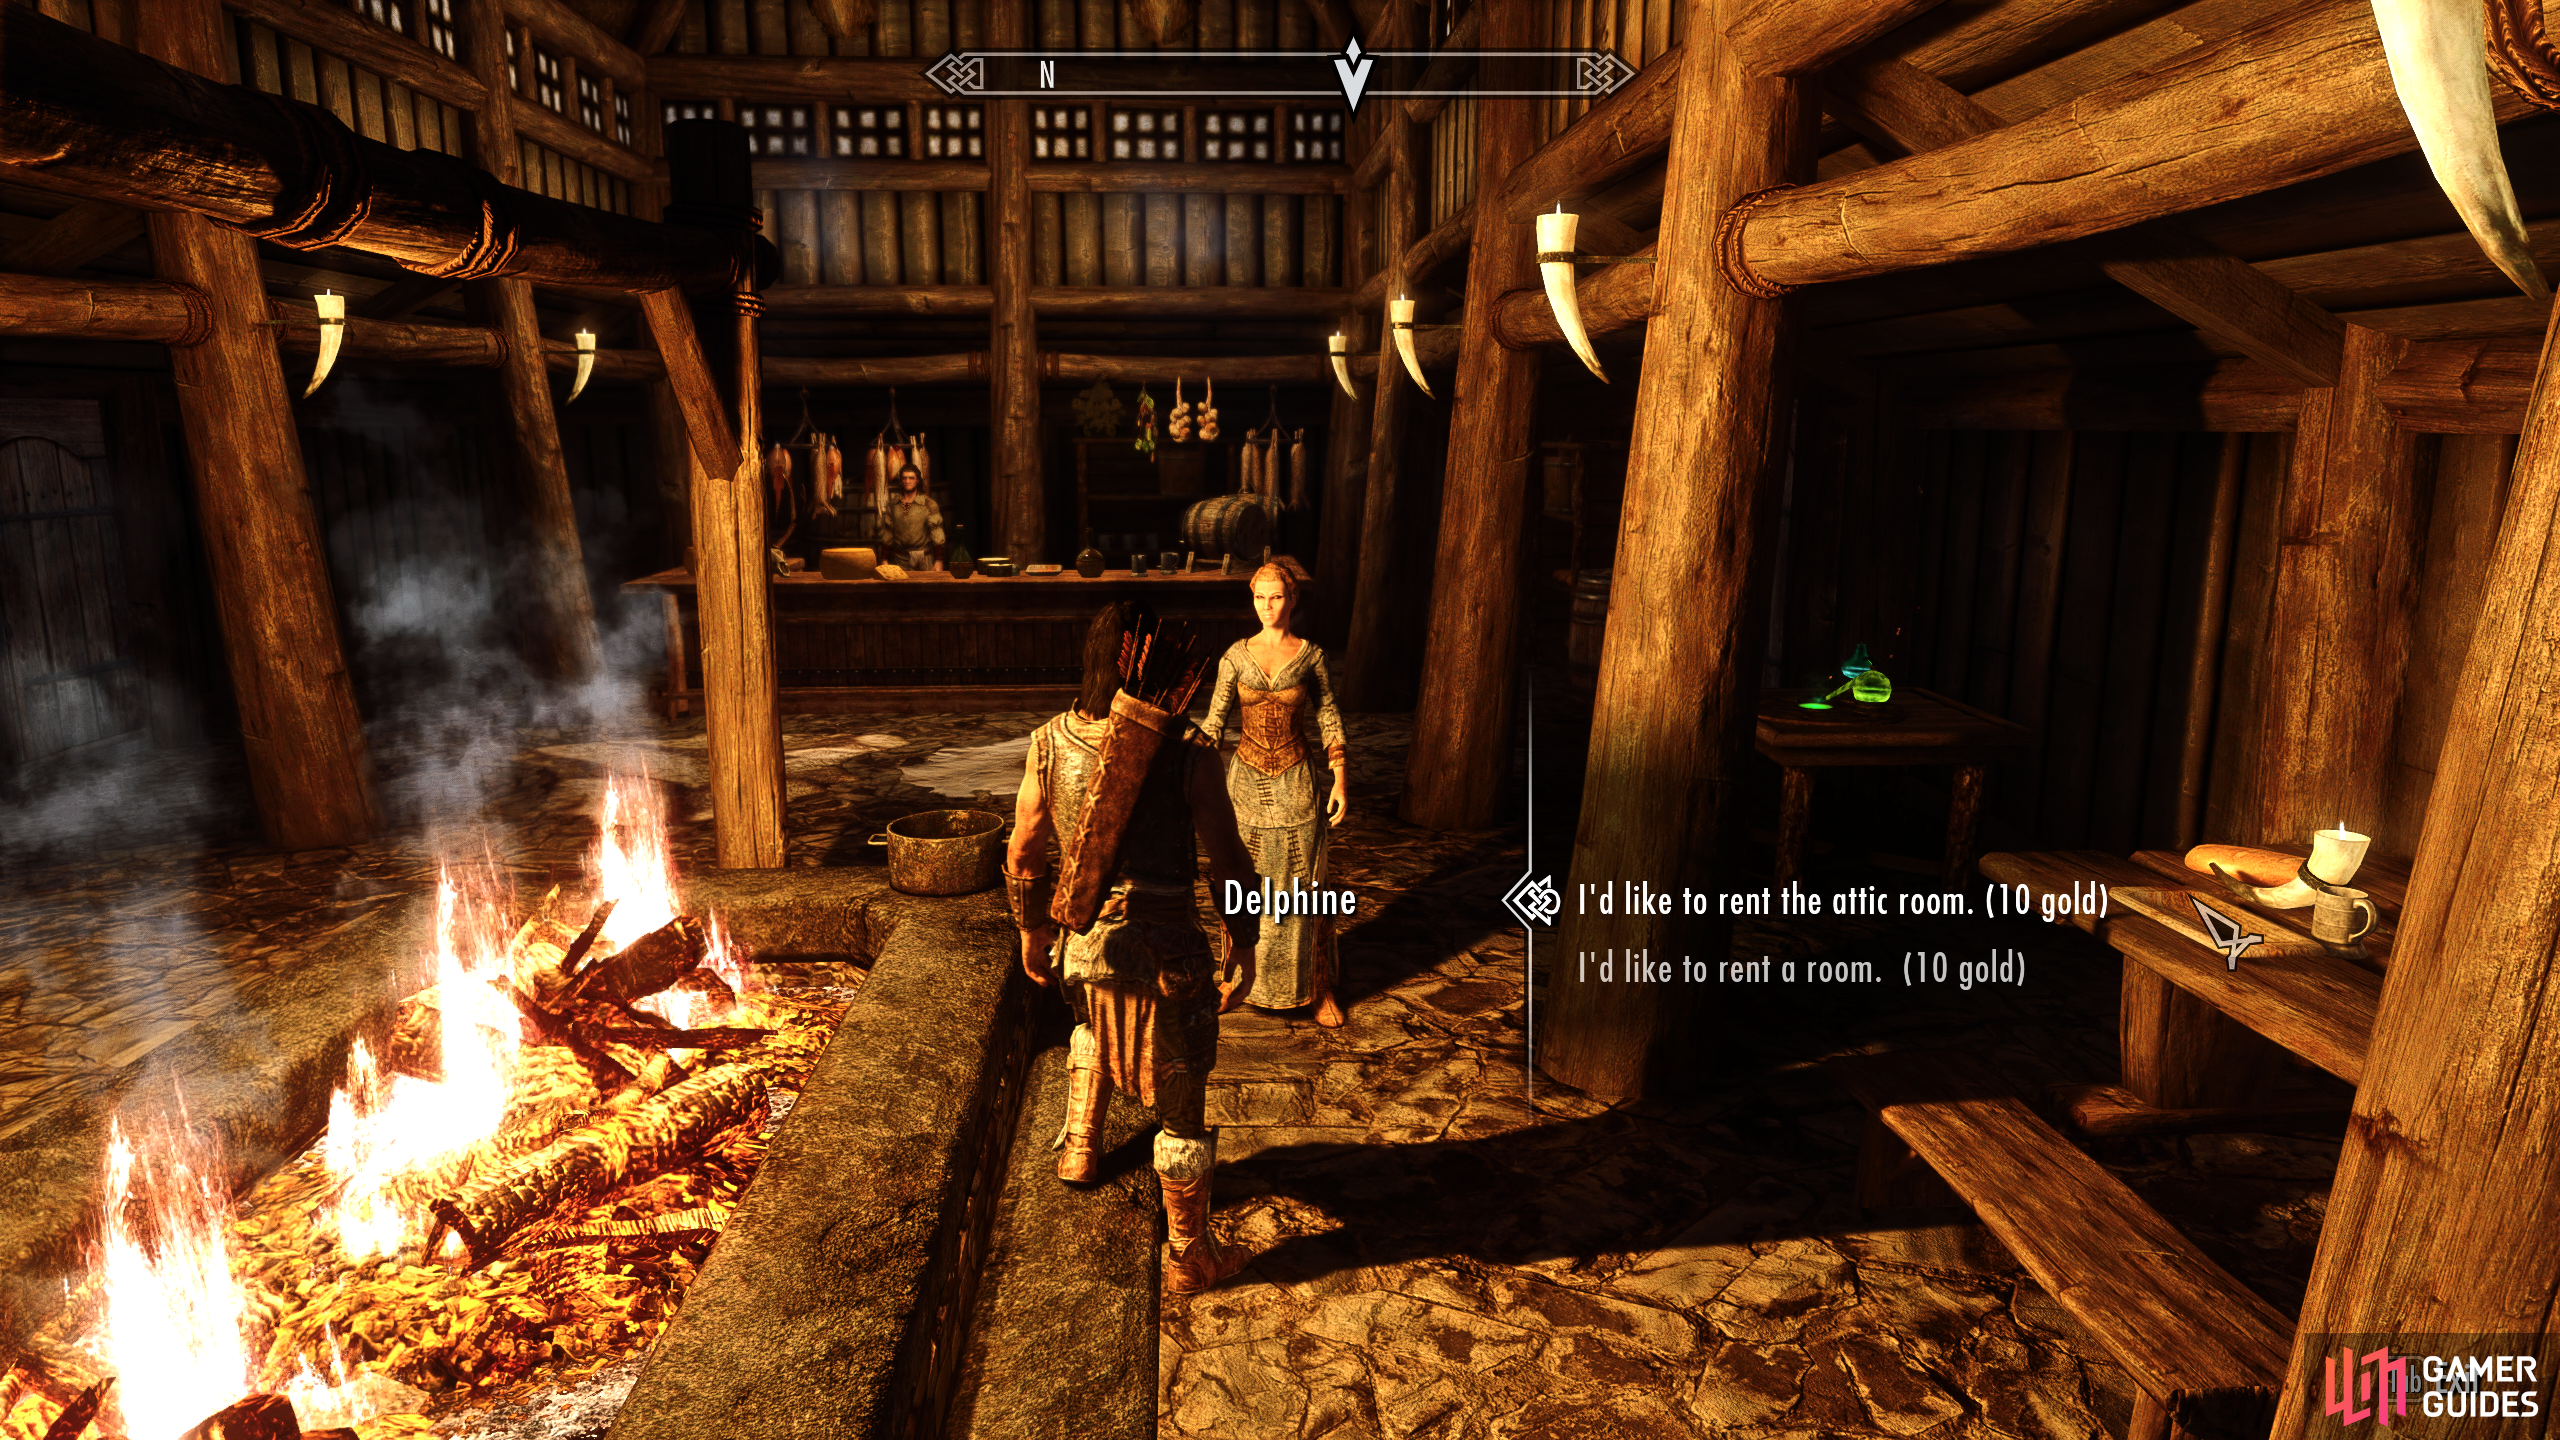 When you reach Riverwood, speak with Delphine to rent the attic room in the Sleeping Giant inn.